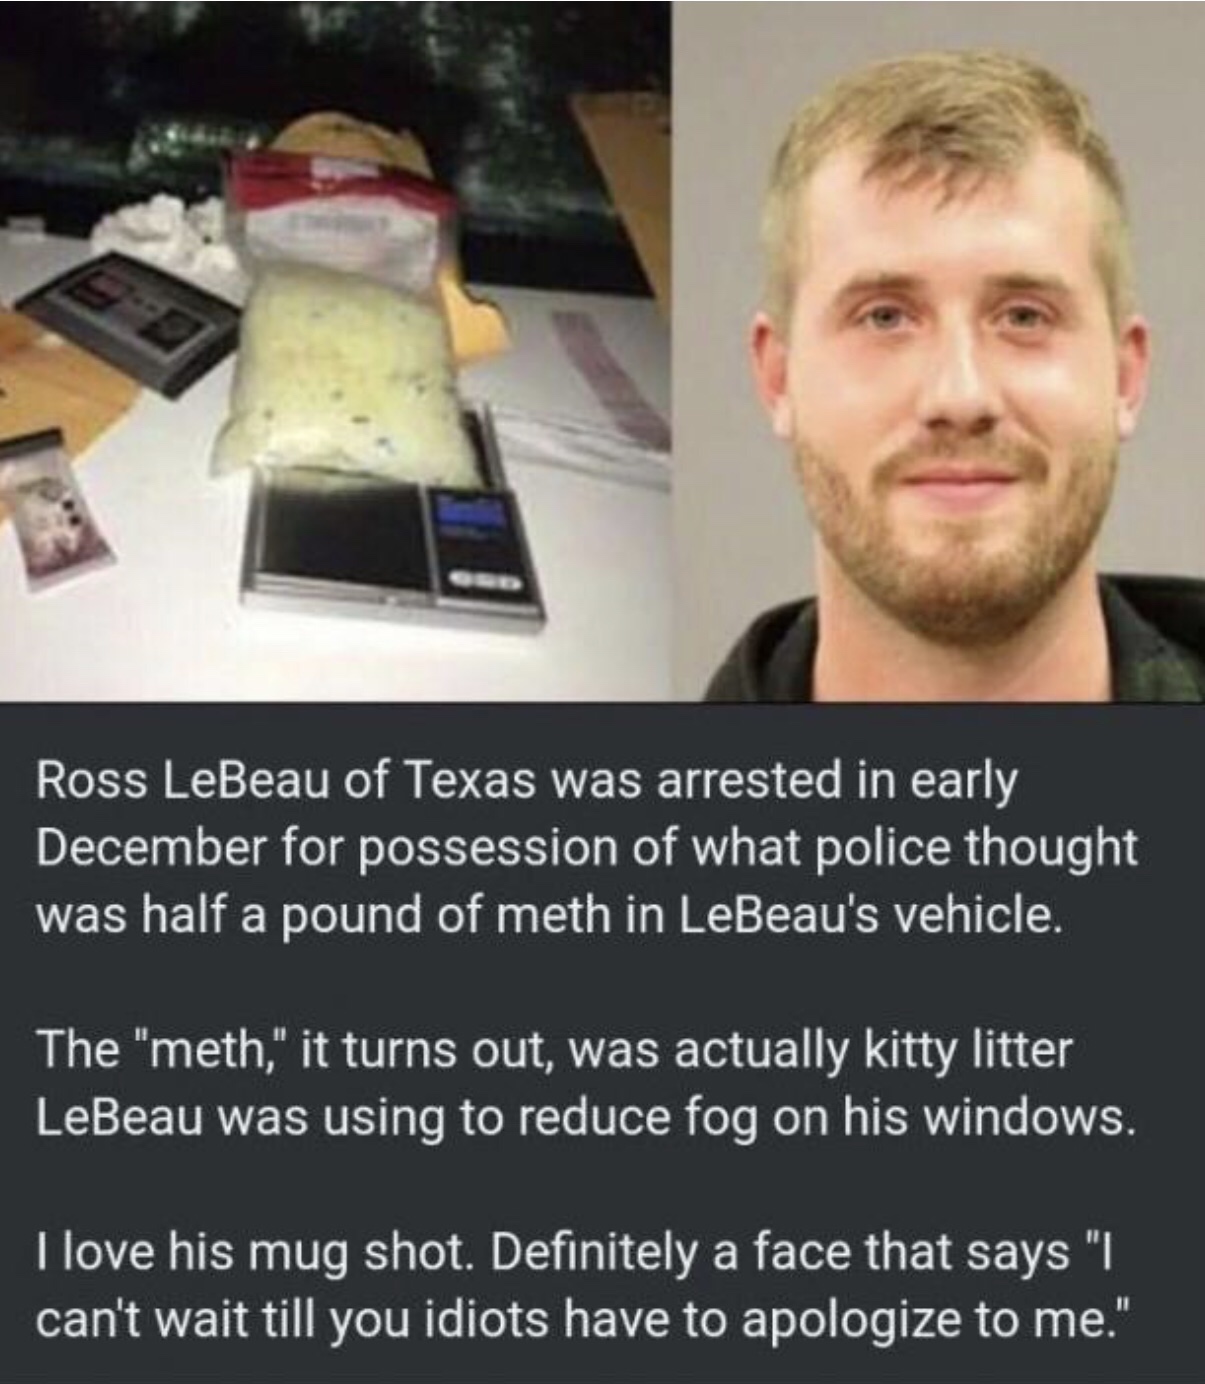 man arrested for cat litter - Ross LeBeau of Texas was arrested in early December for possession of what police thought was half a pound of meth in LeBeau's vehicle. The "meth," it turns out, was actually kitty litter LeBeau was using to reduce fog on his